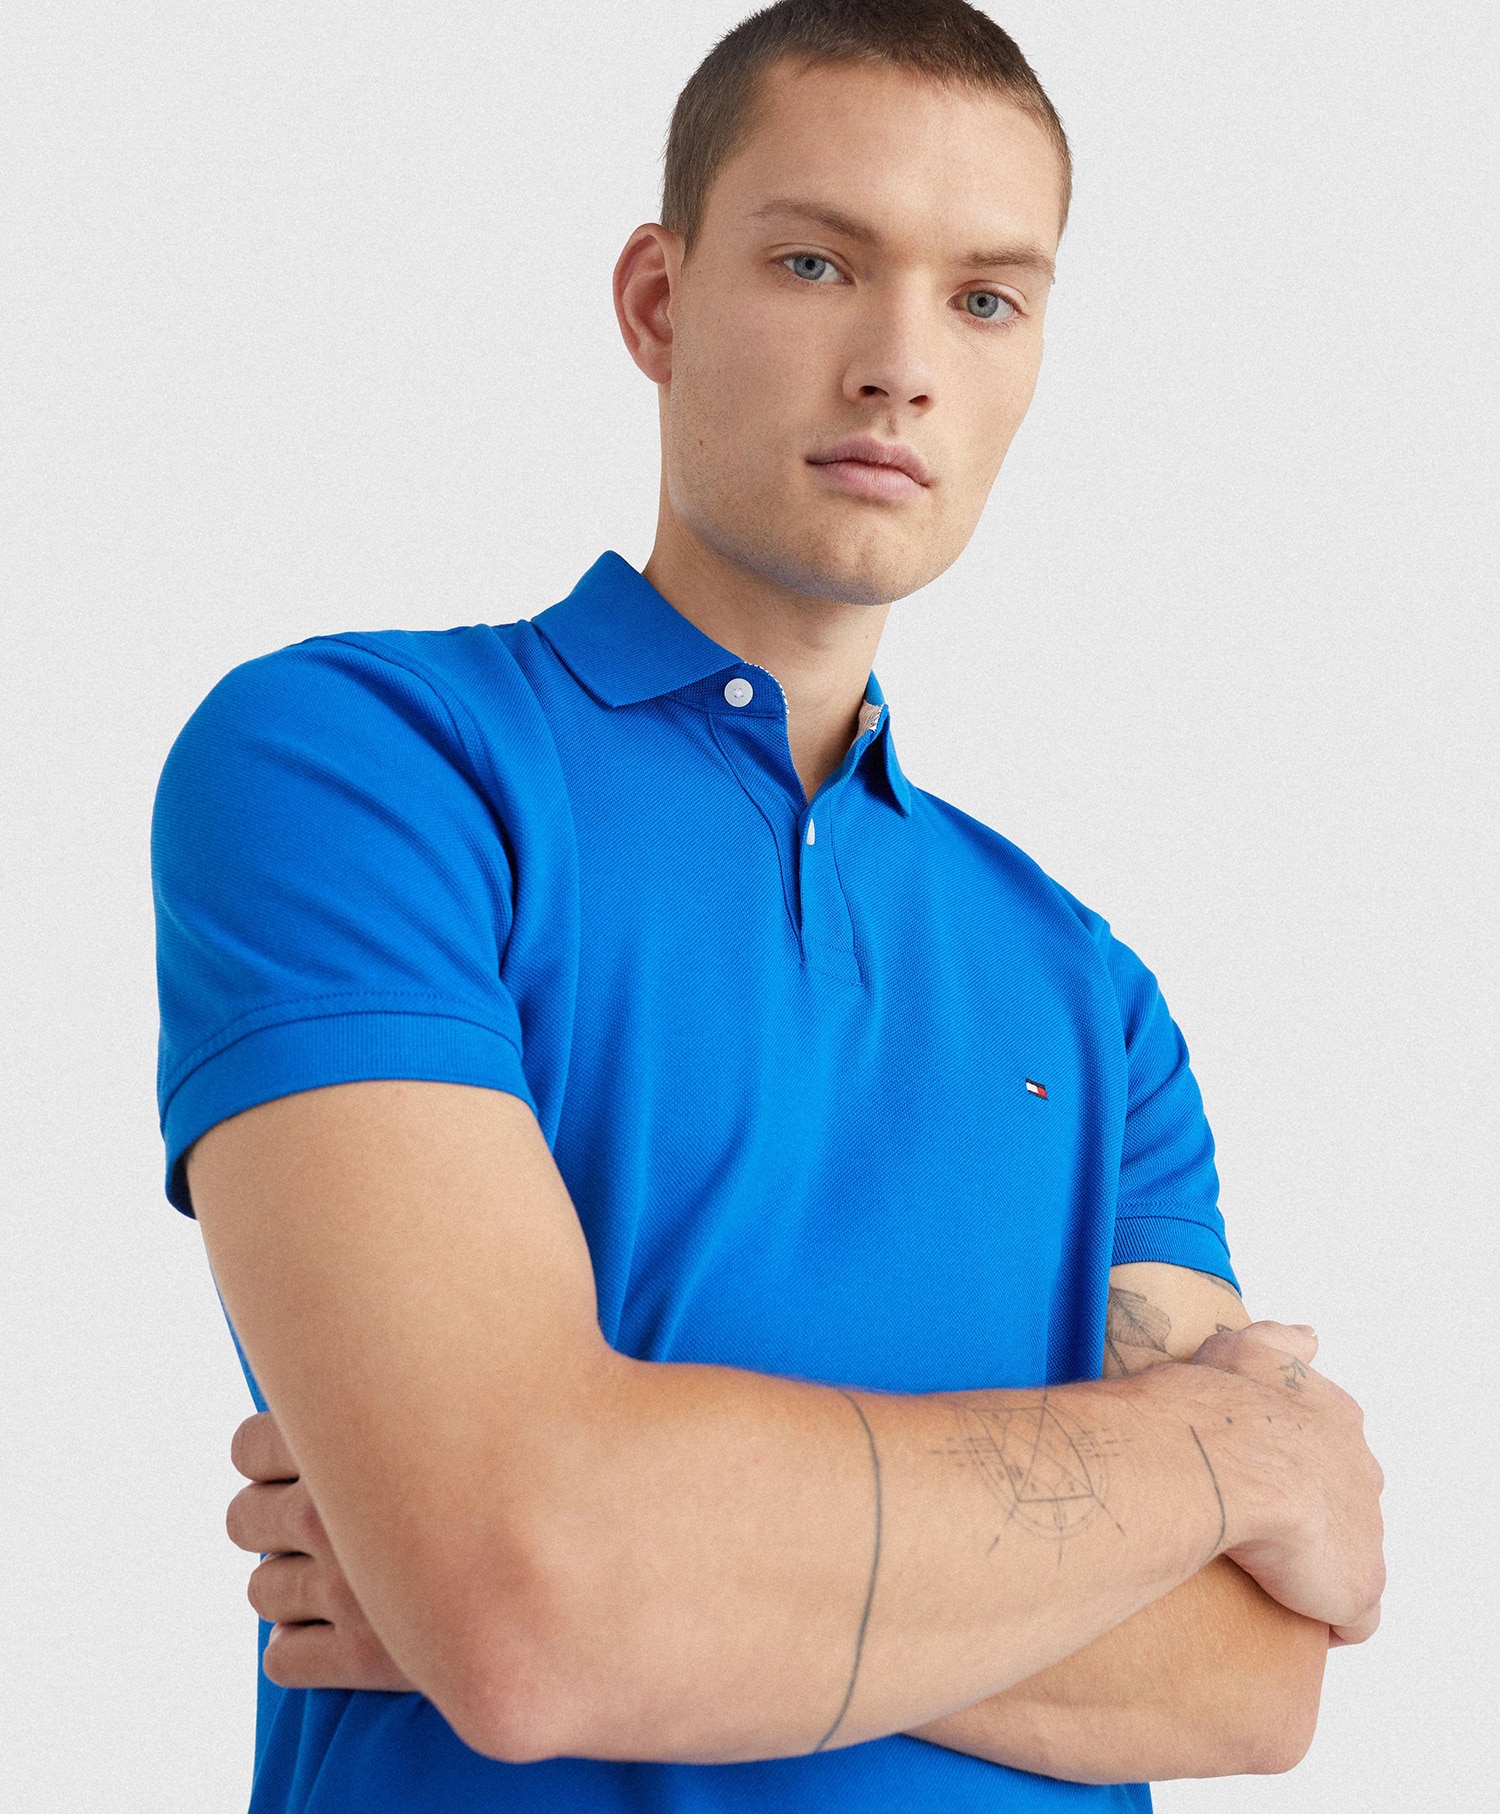 Tommy Hilfiger 1985 Polo